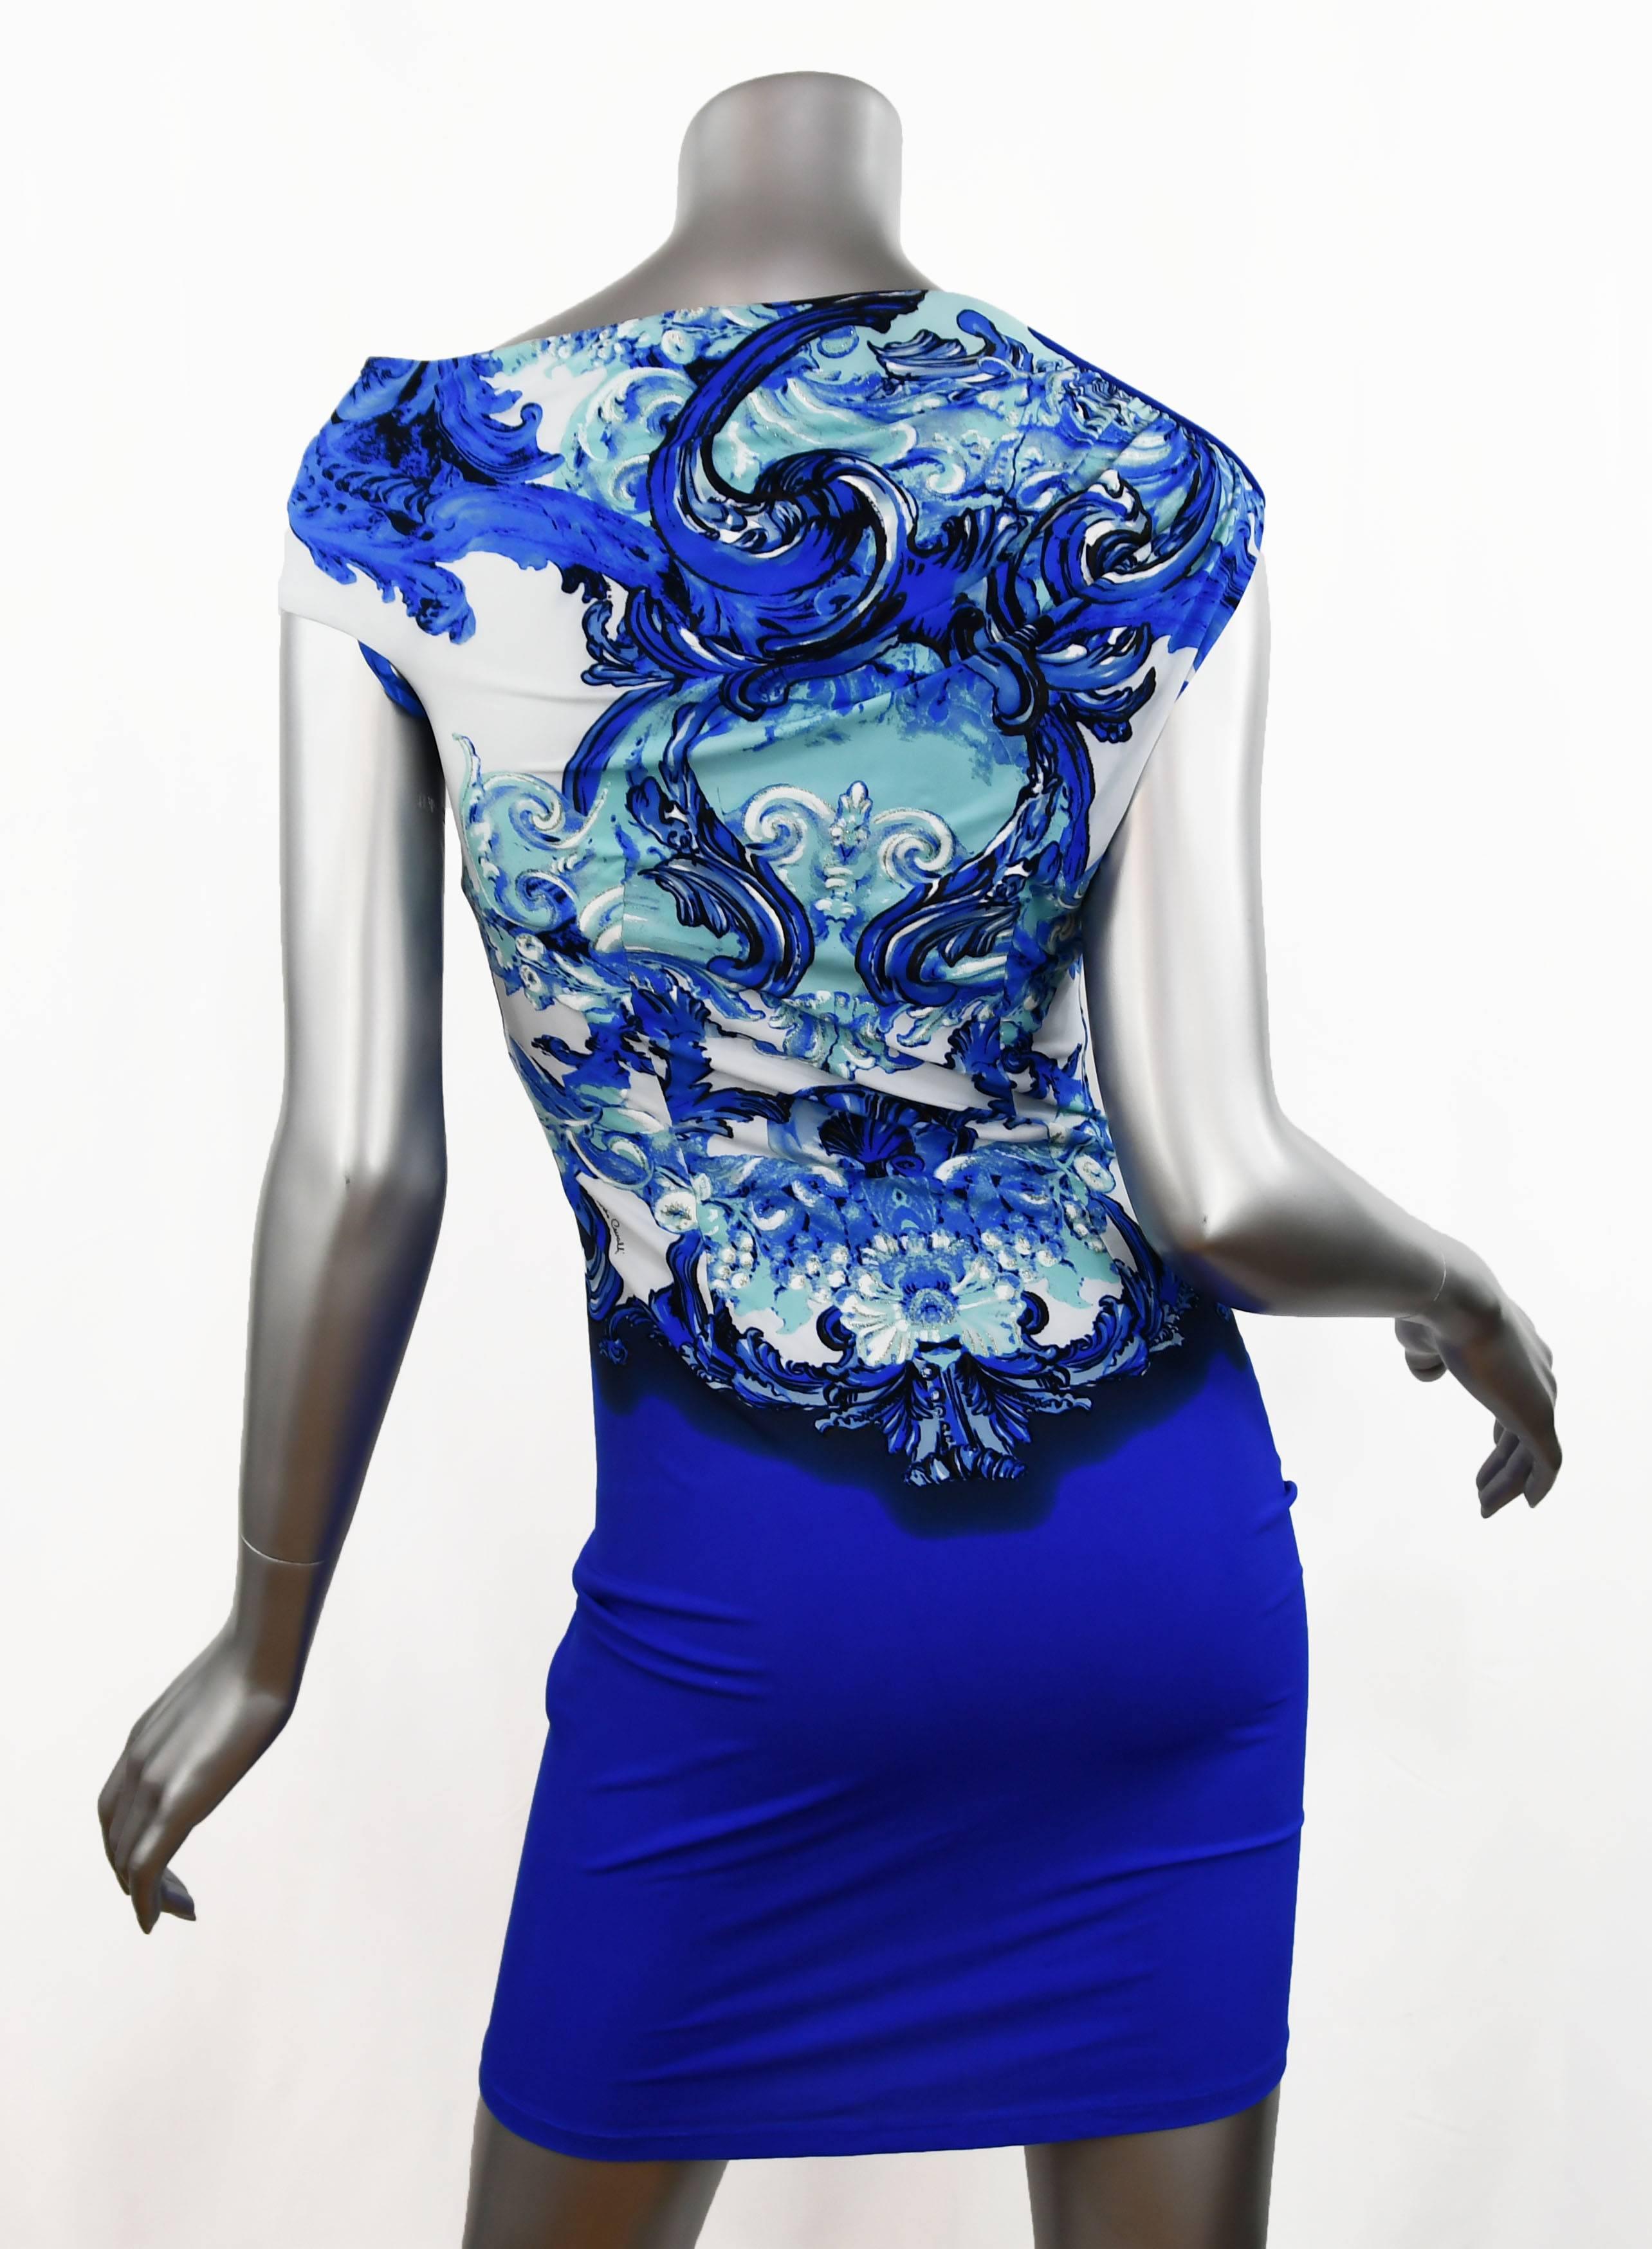 Roberto Cavalli Royal Blue with Mermaid/Sea Print Beach Dress, Size 40 In Excellent Condition For Sale In Newport, RI